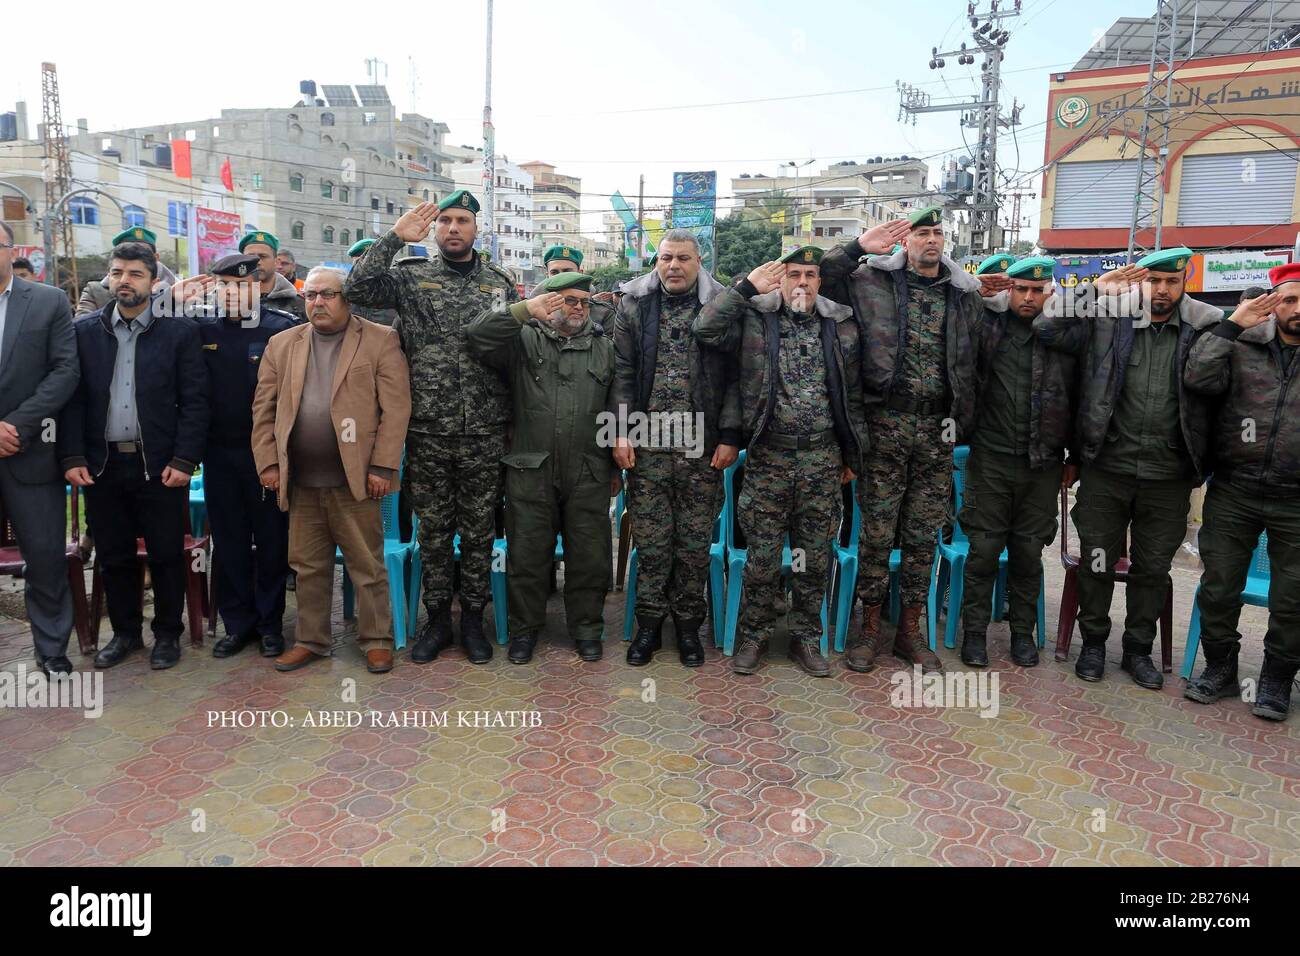 Palestinian security members take part in the International Civil Defense Day, in Gaza Strip, on March 1, 2020. Photo by Abed Rahim Khatib/Alamy Stock Photo